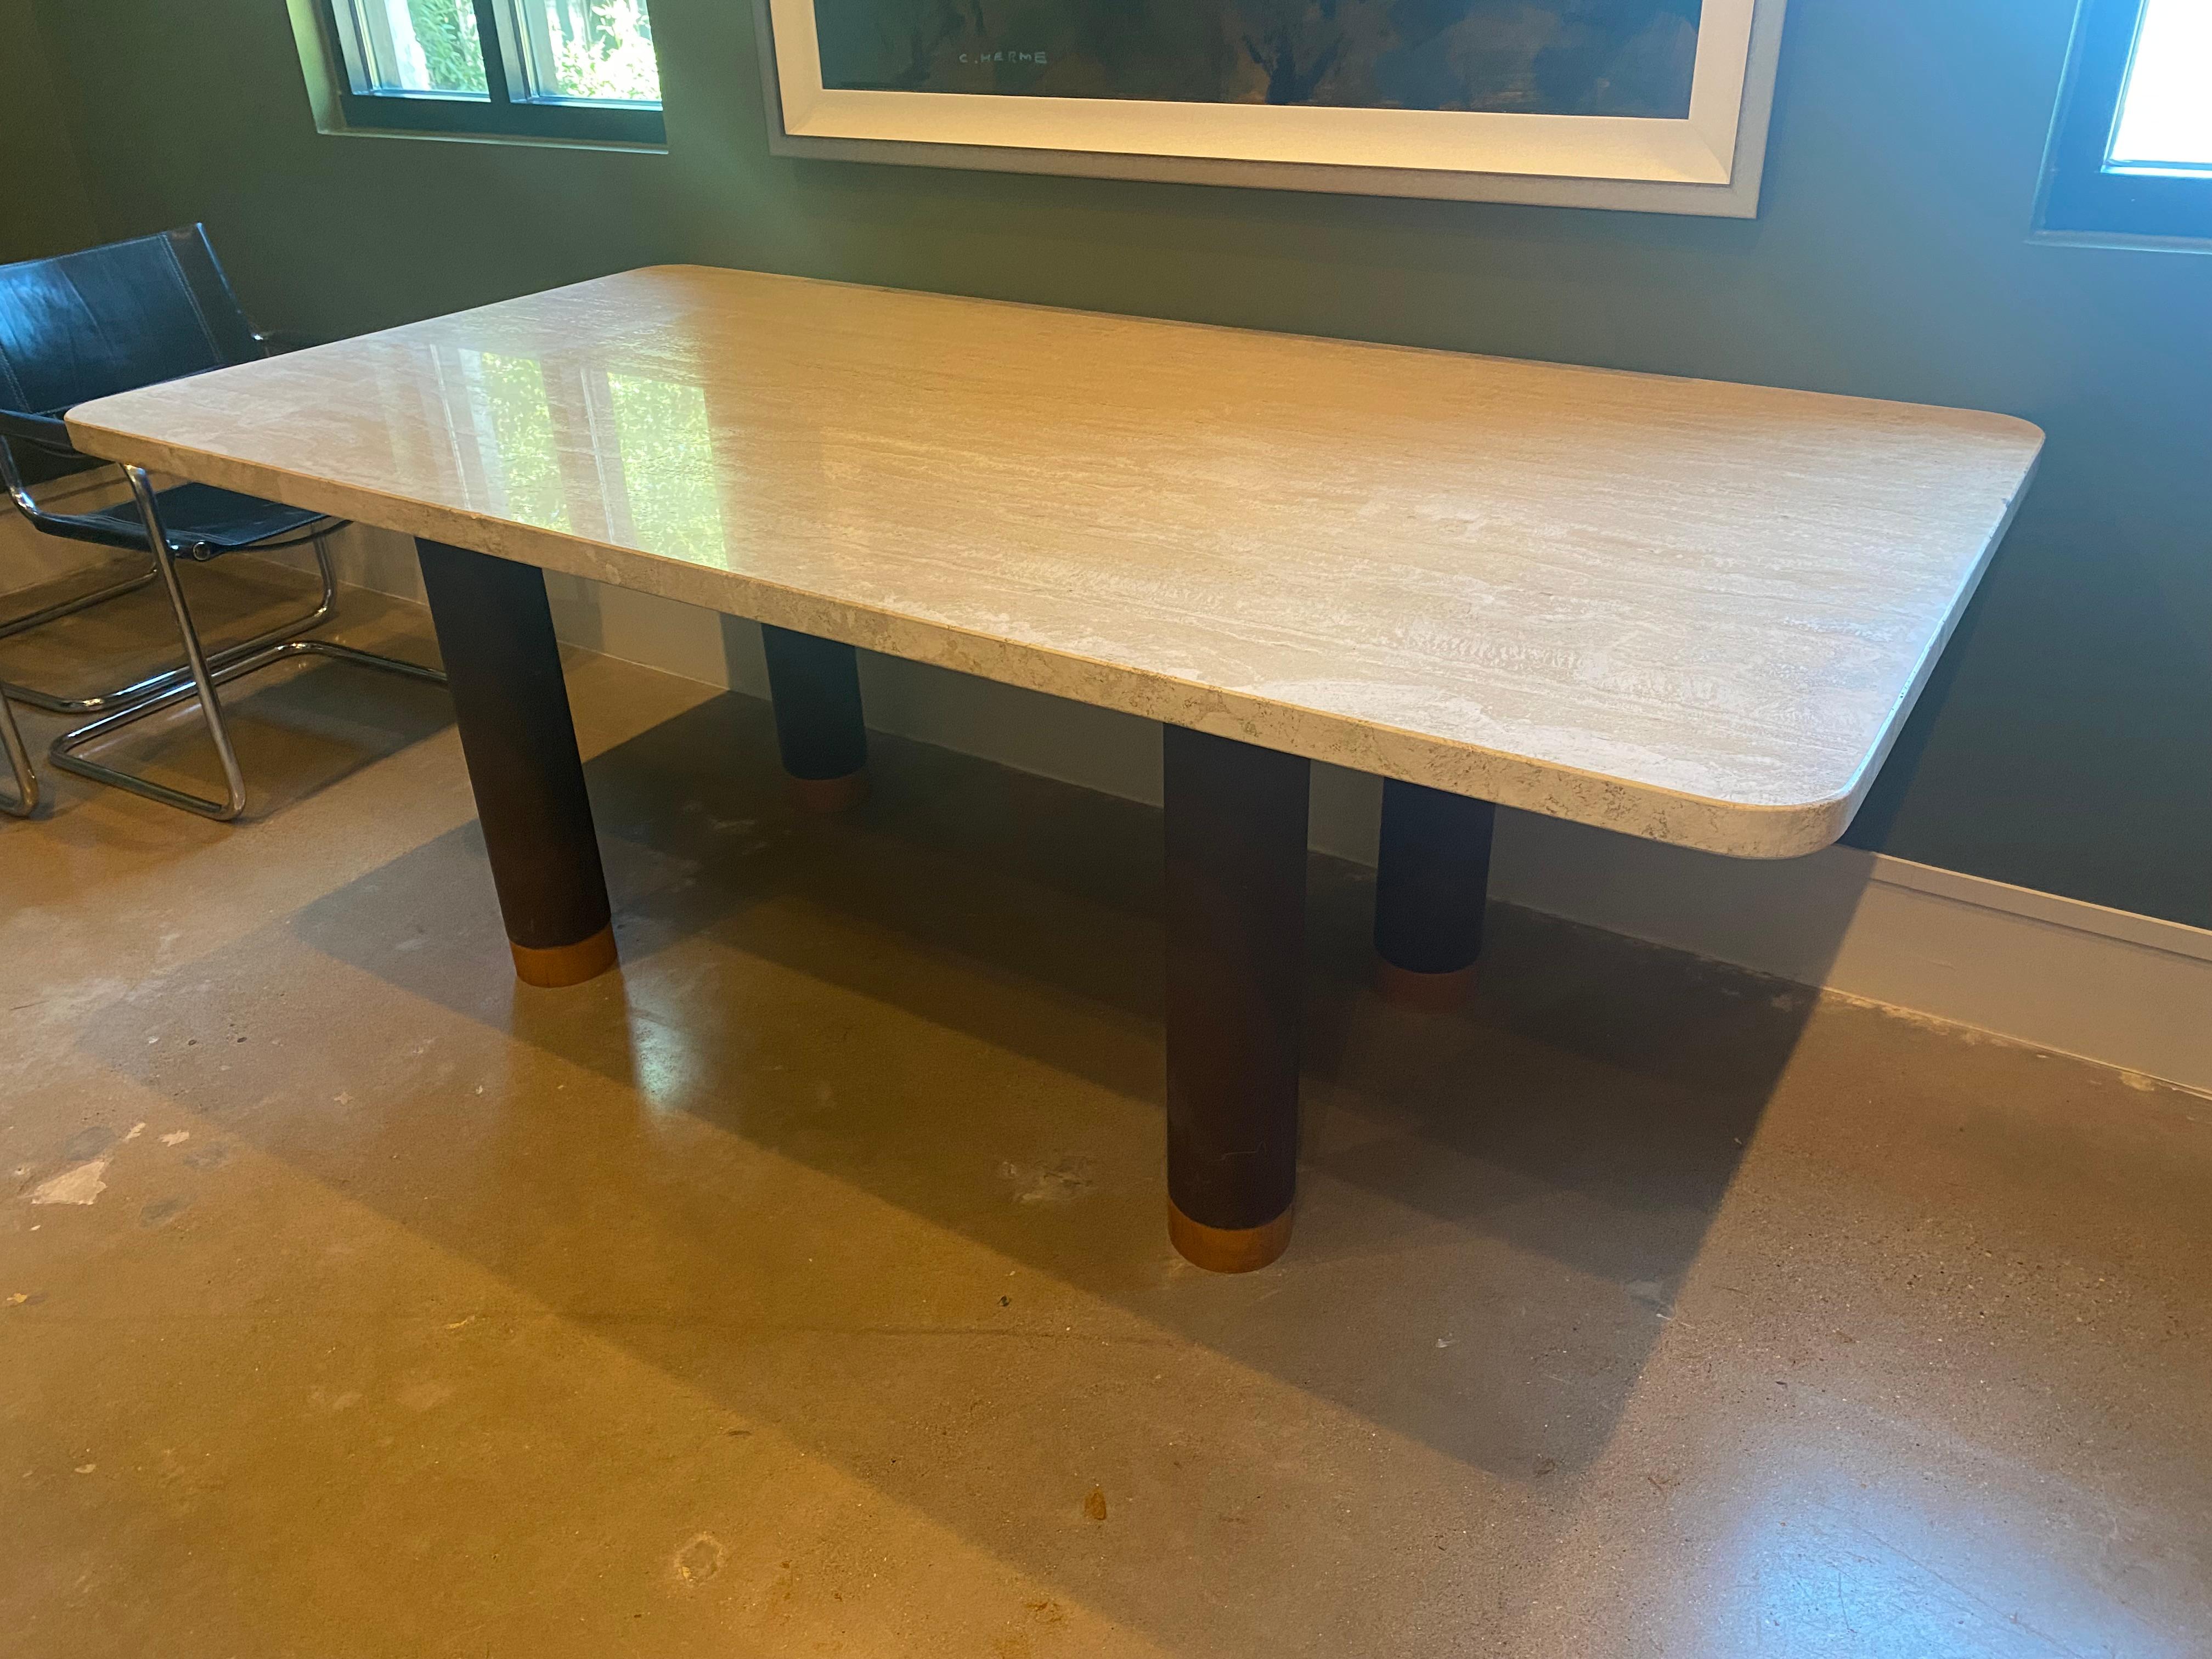 Italian travertine dining table with thick stone top. Tubular steel base in brown has solid wood caps at feet. Stone looks slightly lighter in person than in the photographs. Stone top removes for transport. Italy, 1970's.